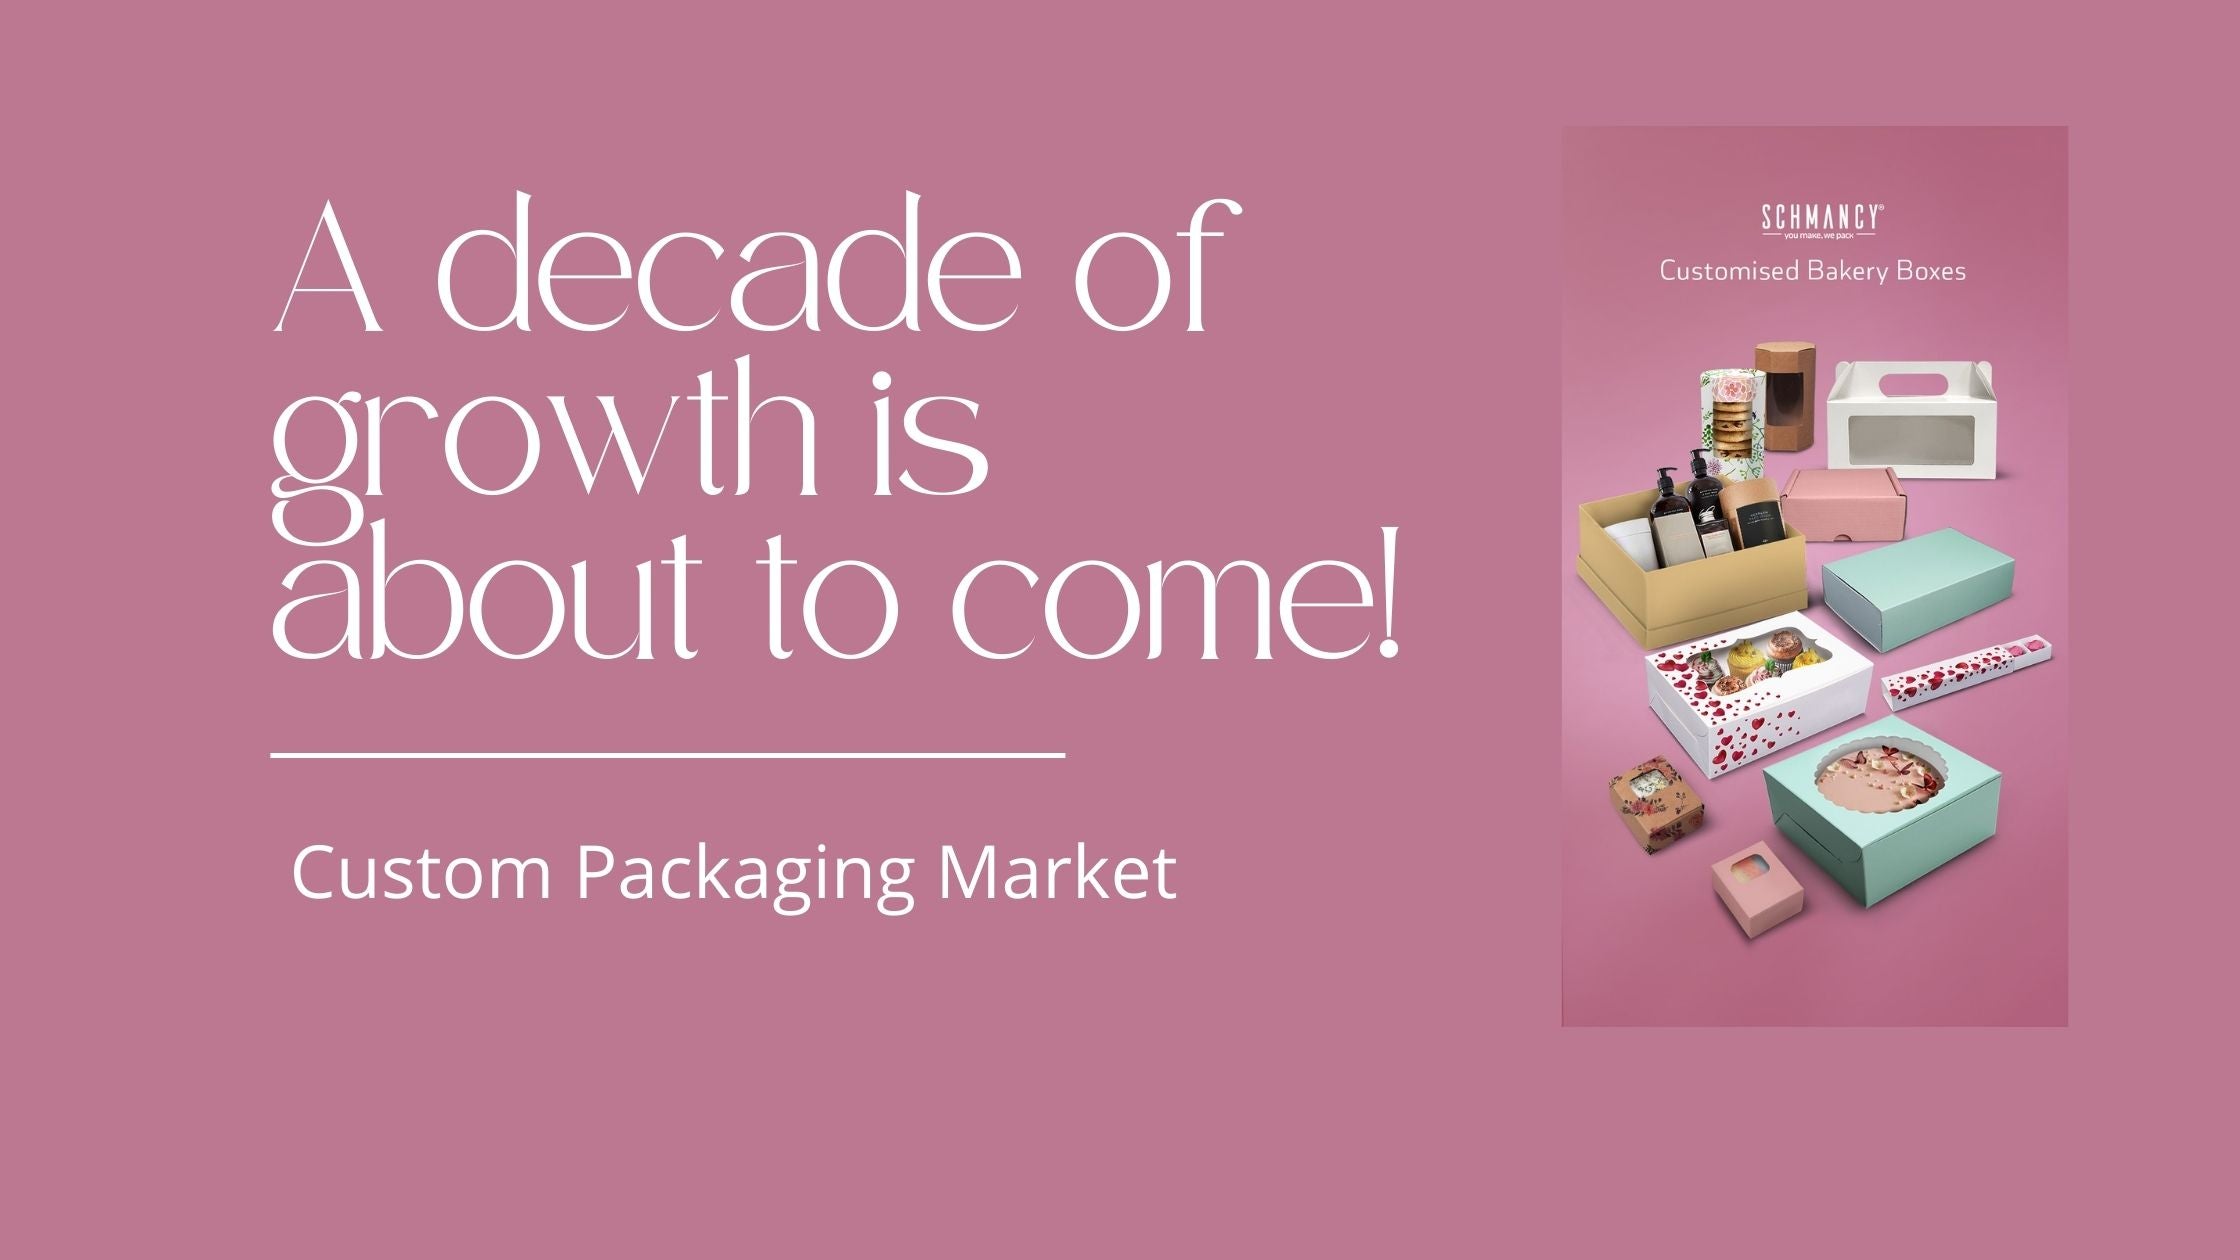 Custom Packaging Market - A decade of growth is about to come!